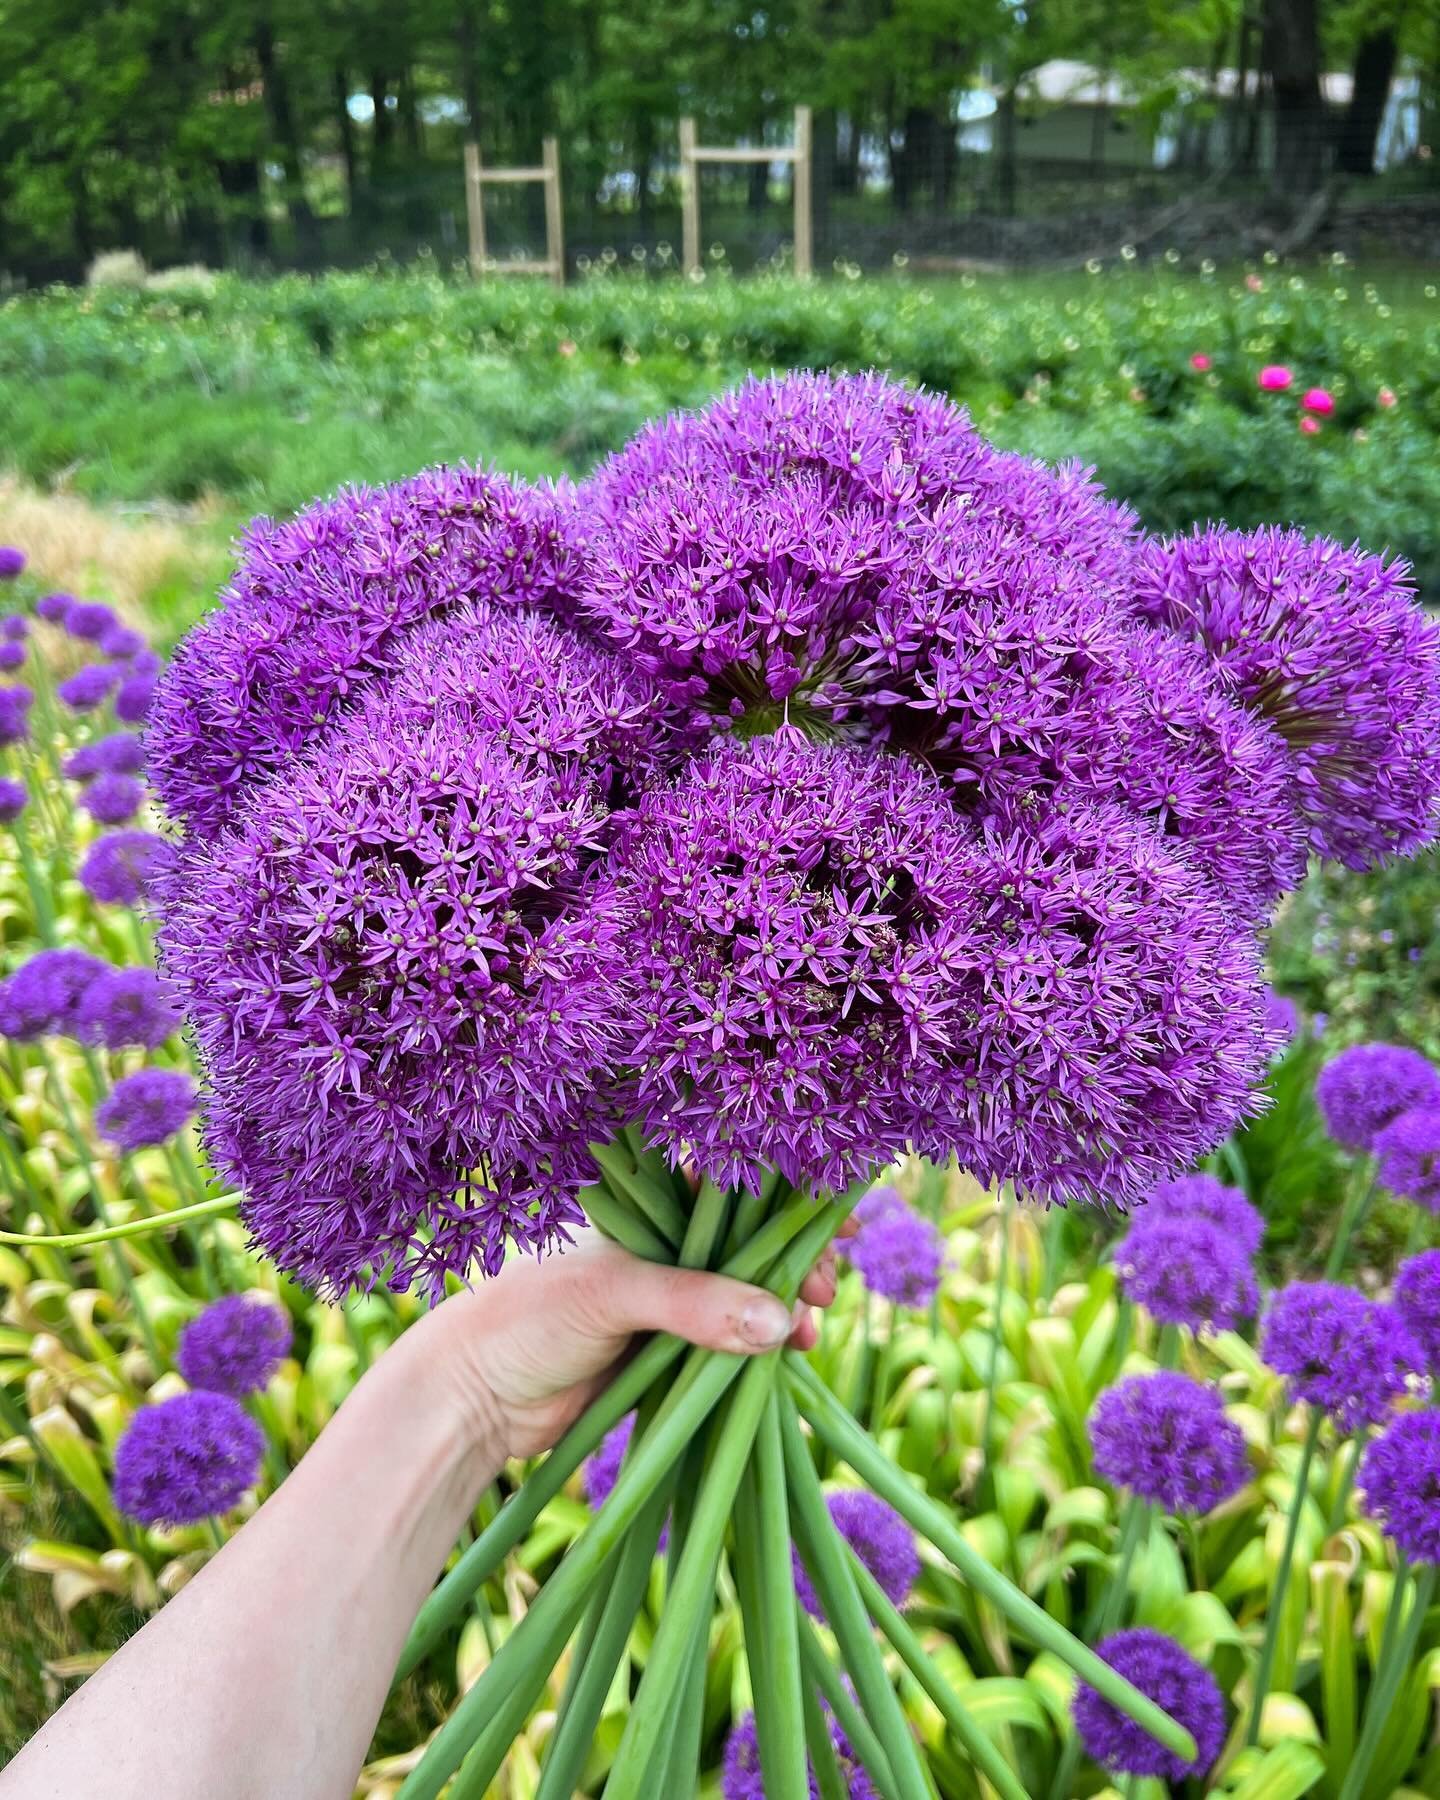 These Dr. Seuss-looking guys will be with us at the Morgantown farmers market today, downtown form 8:30-noon. They are Purple Sensation allium, and I think they smell like grapes. Come check them out!
.
.
.
#alliums #springflowers @morgantownmkt #may